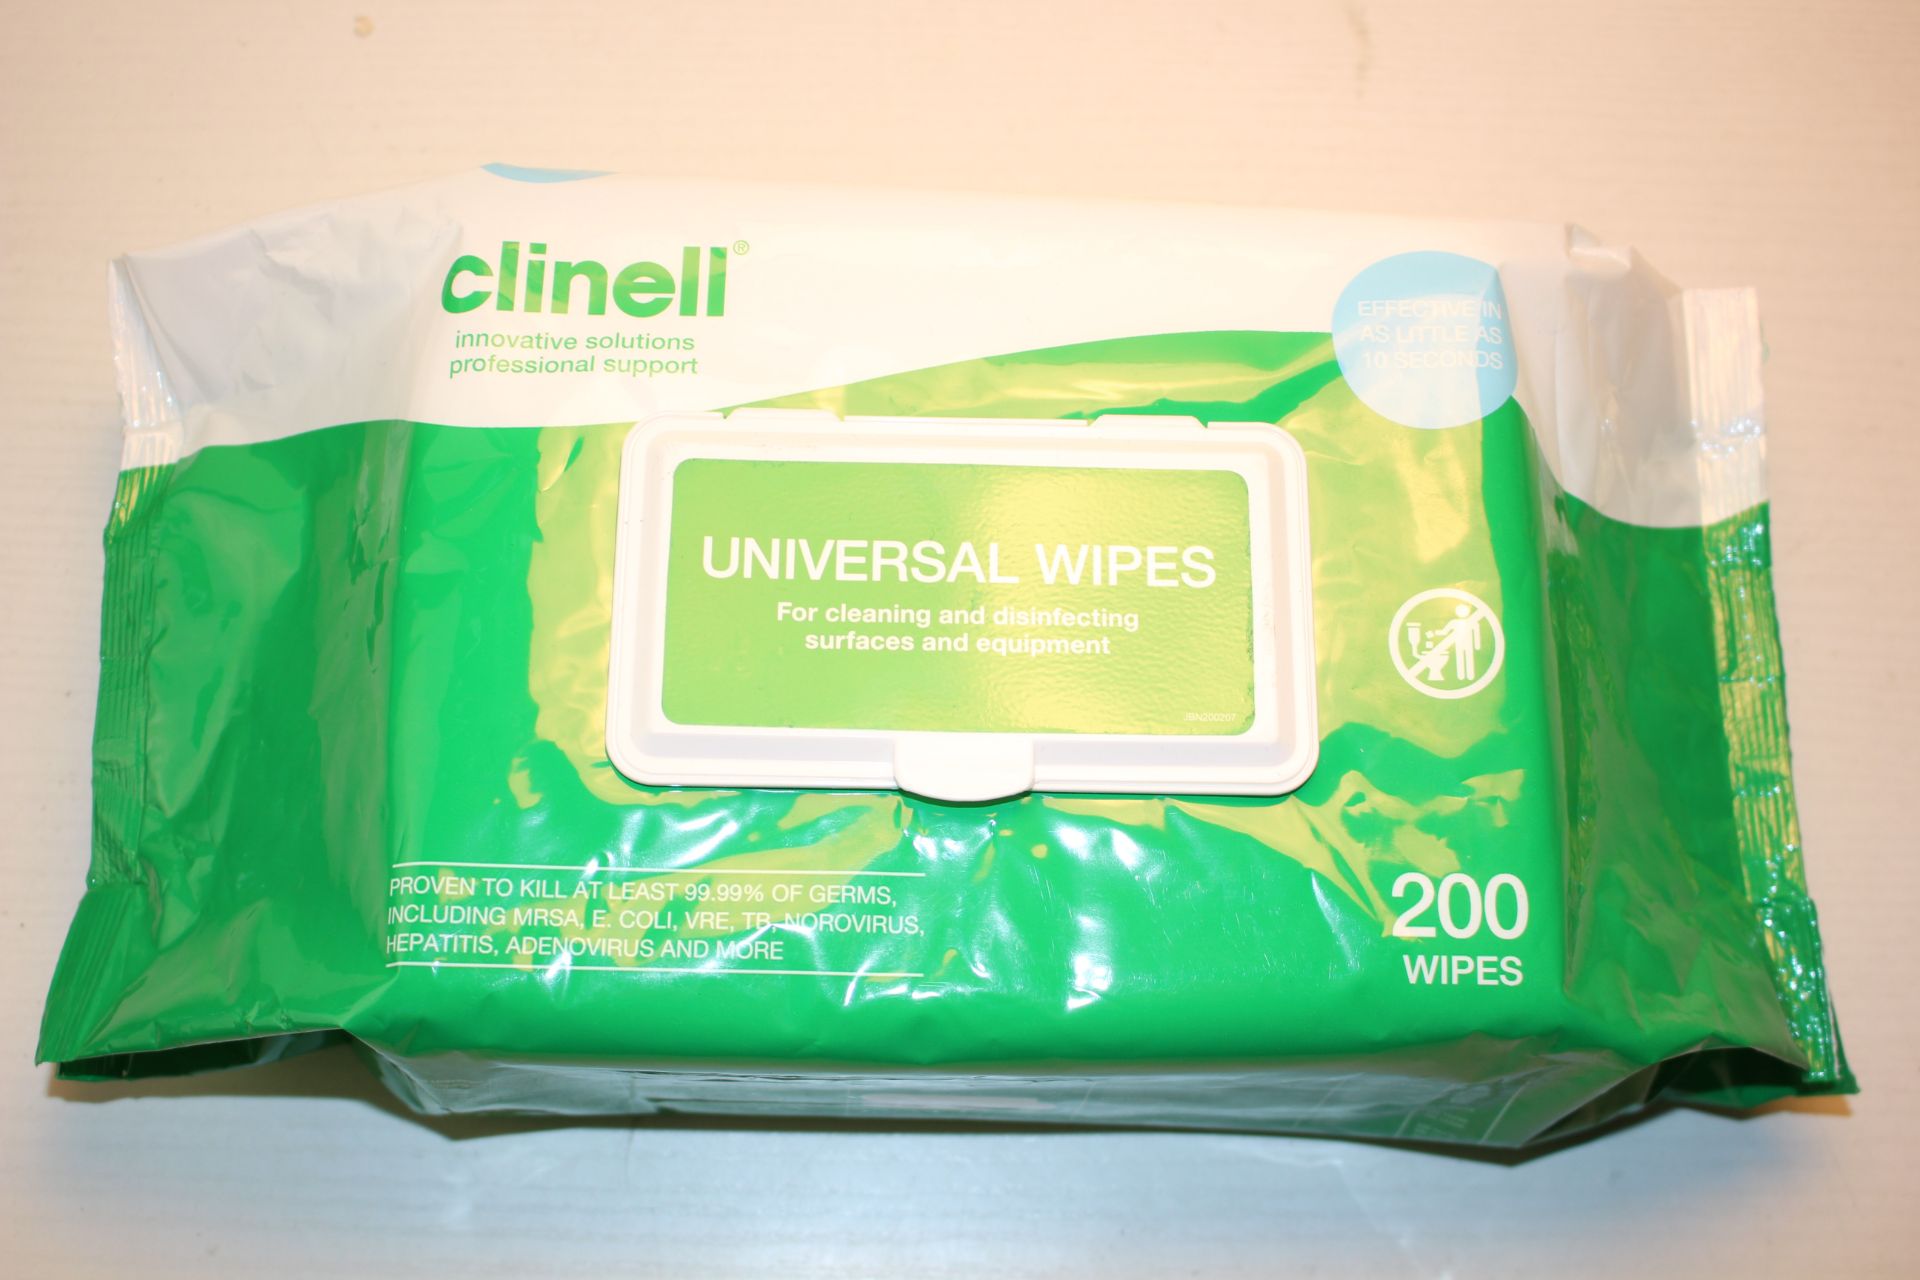 3X PACKS 200WIPES CLINELL UNIVERSAL WIPES PROFESSIONAL GRADE KILL 99.99% GERMS RRP £28.00Condition